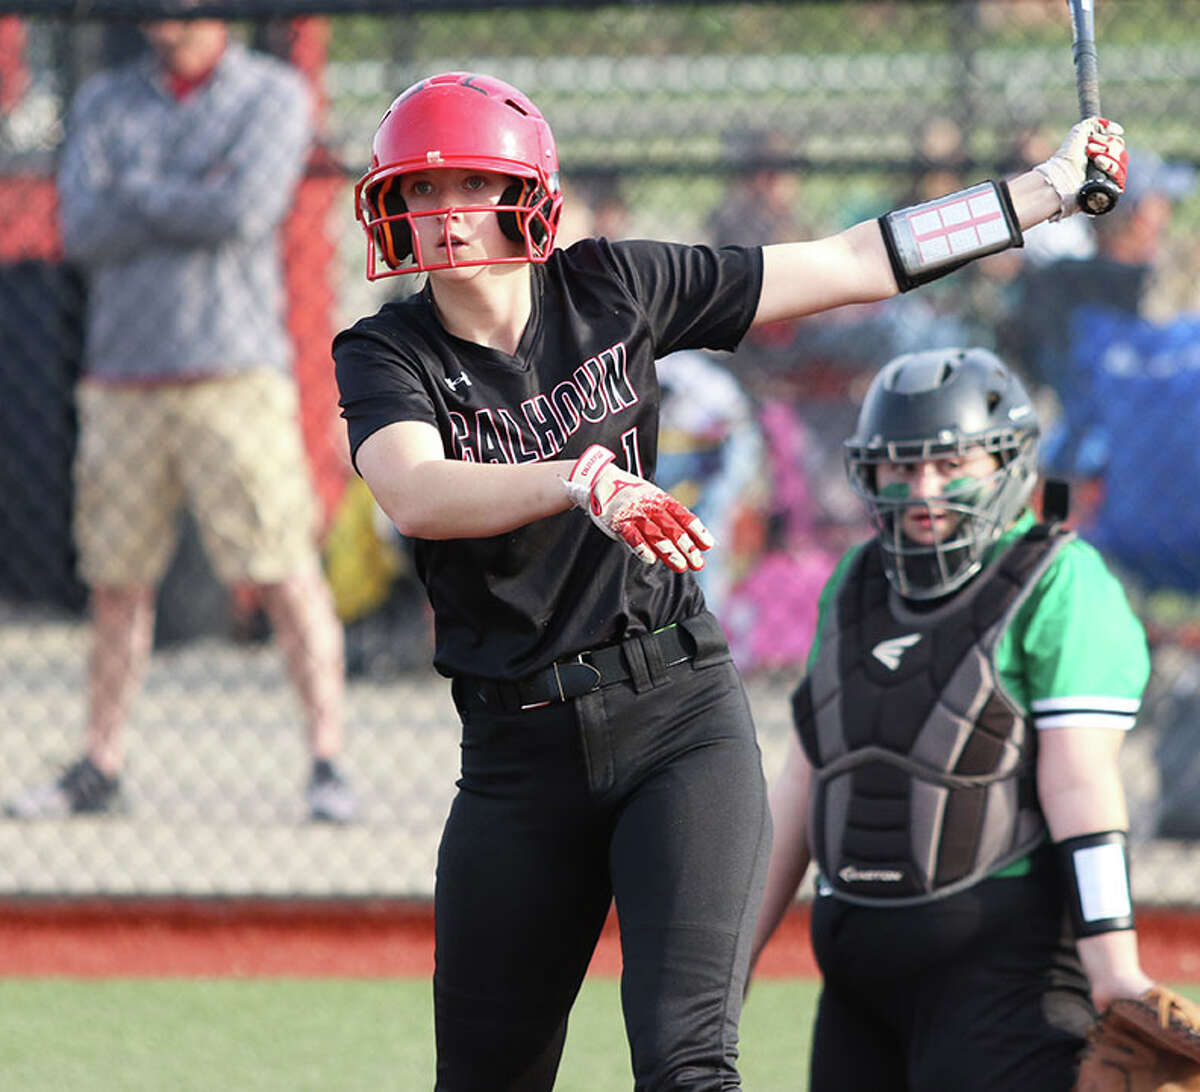 Calhoun's Lila Simon (left) looks to her coach before getting in the batter's box against Carrollton in a game earlier this season in Jacksonville. On Saturday, Simon hit a triple and scored the game-winning run to beat Marissa in a Class 1A sectional title game.